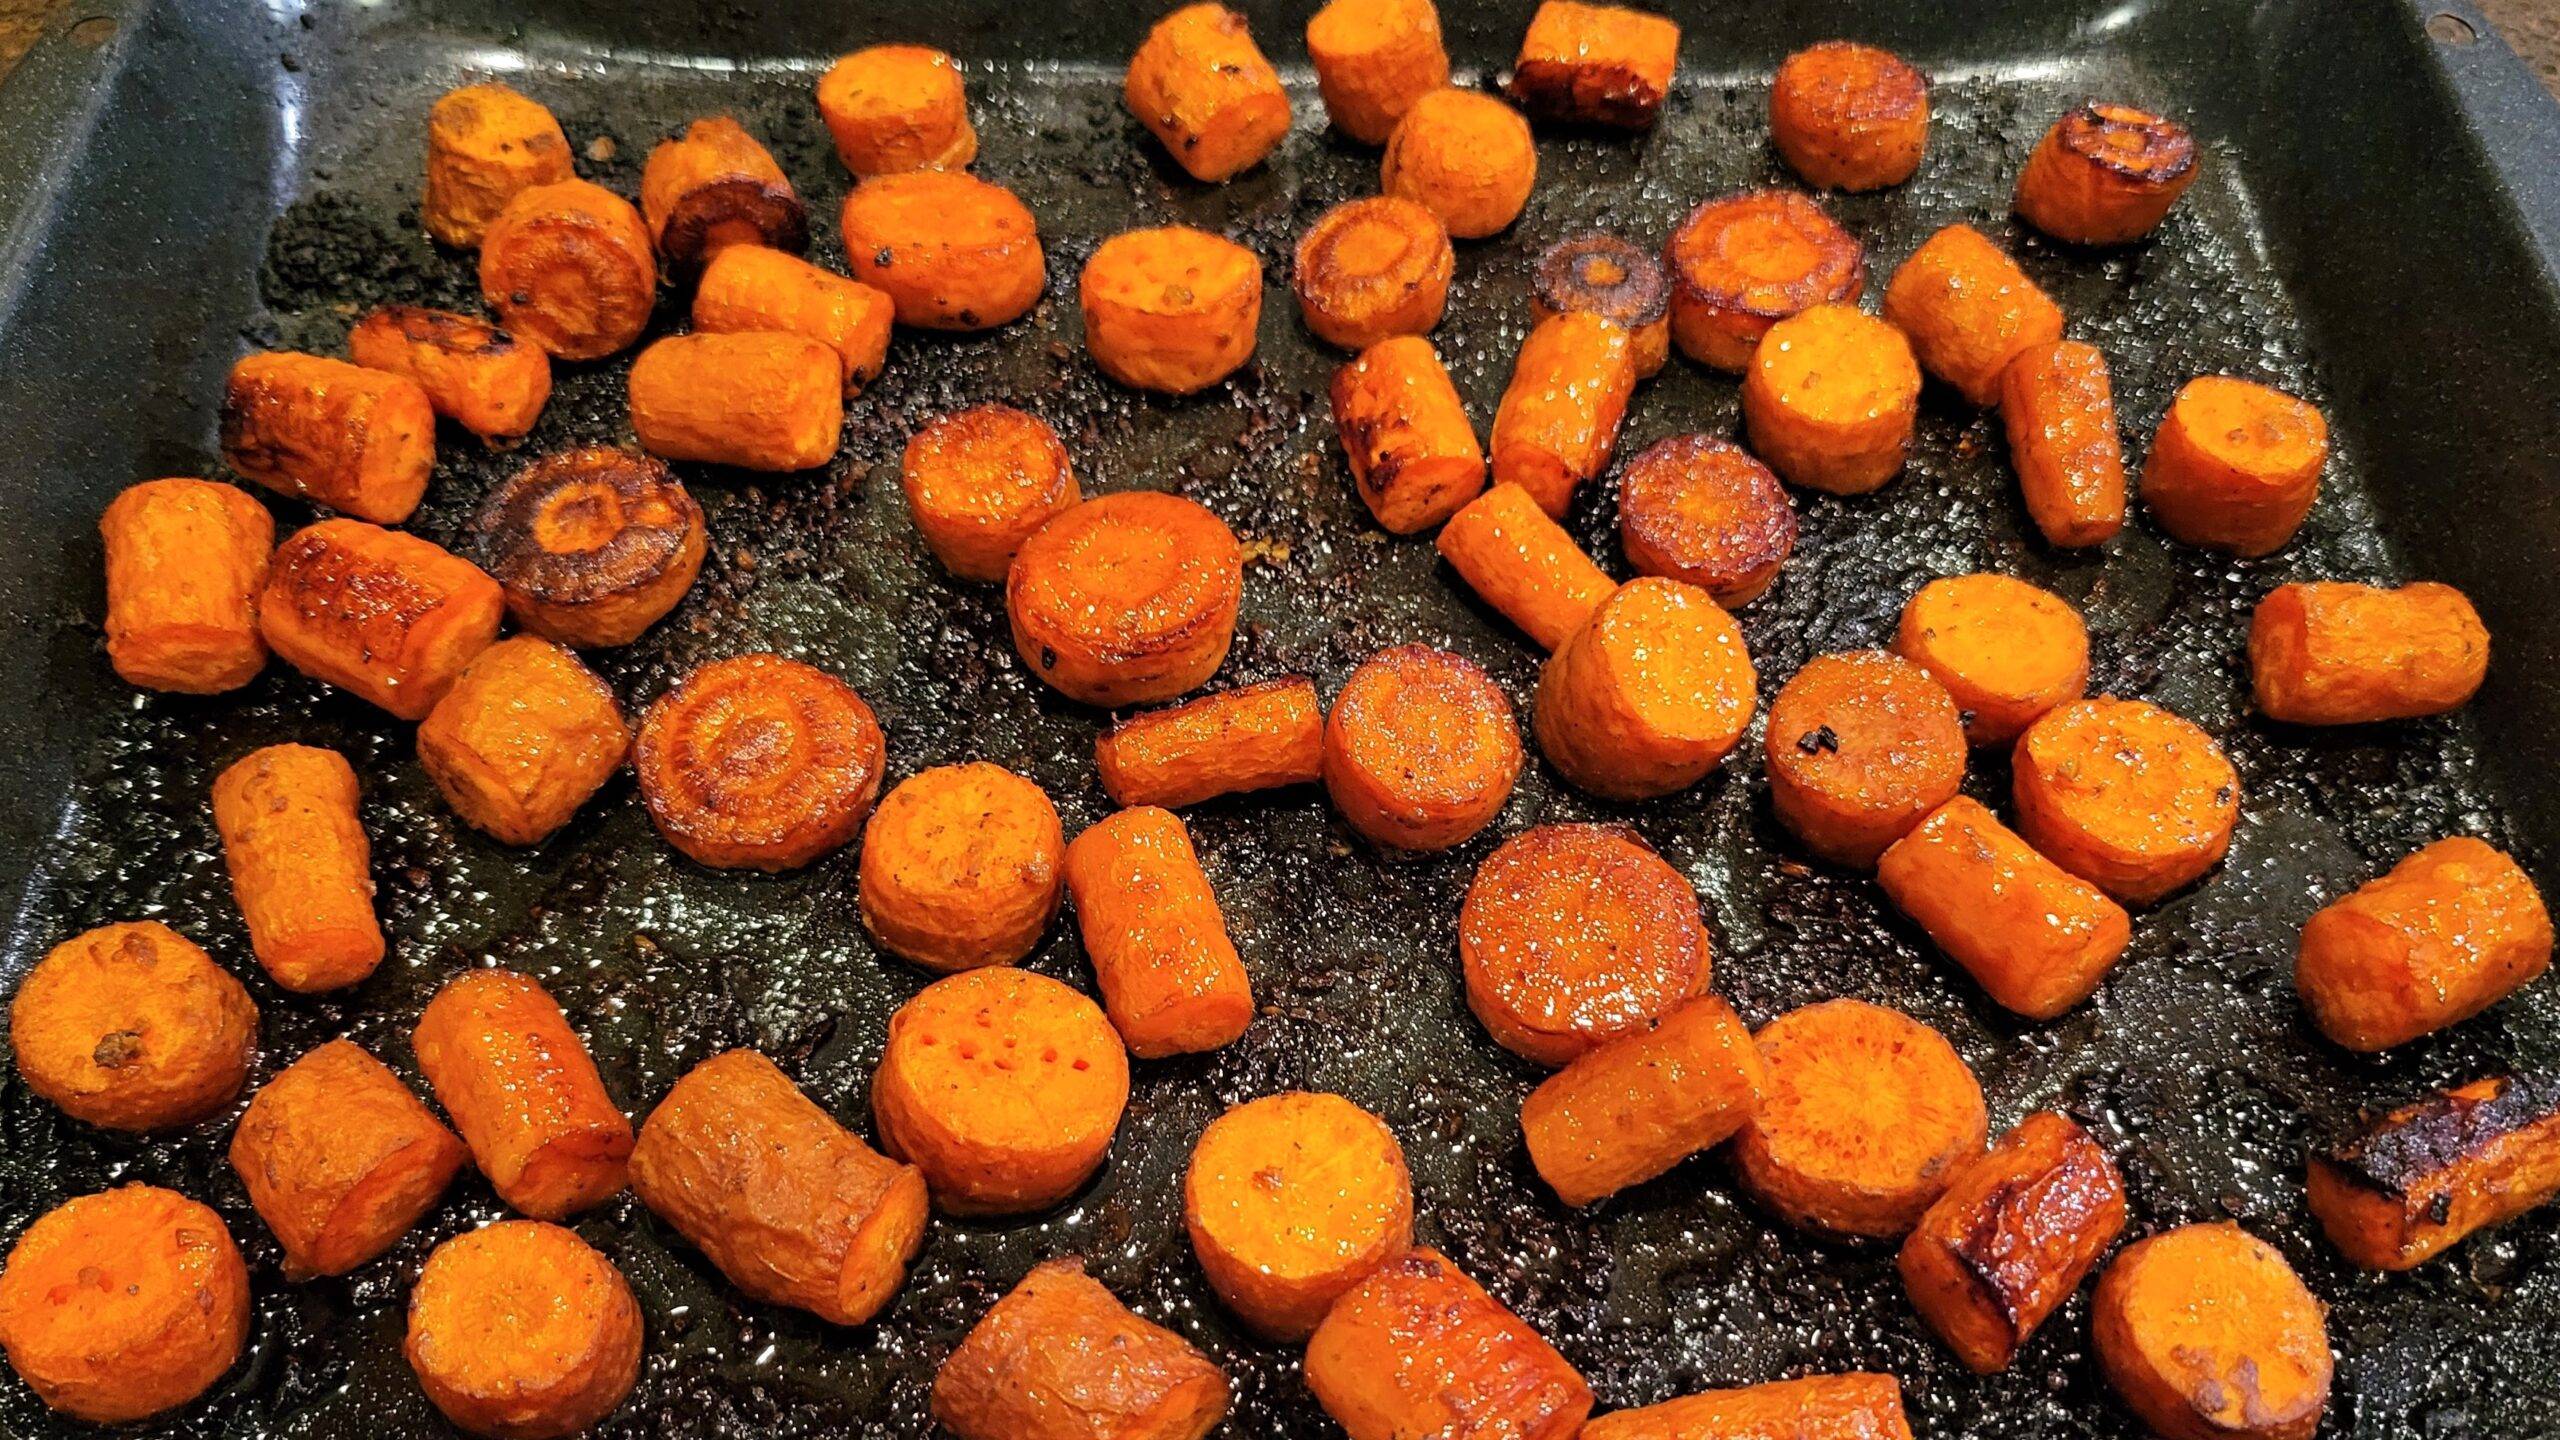 Roasted Carrots - Dining in with Danielle